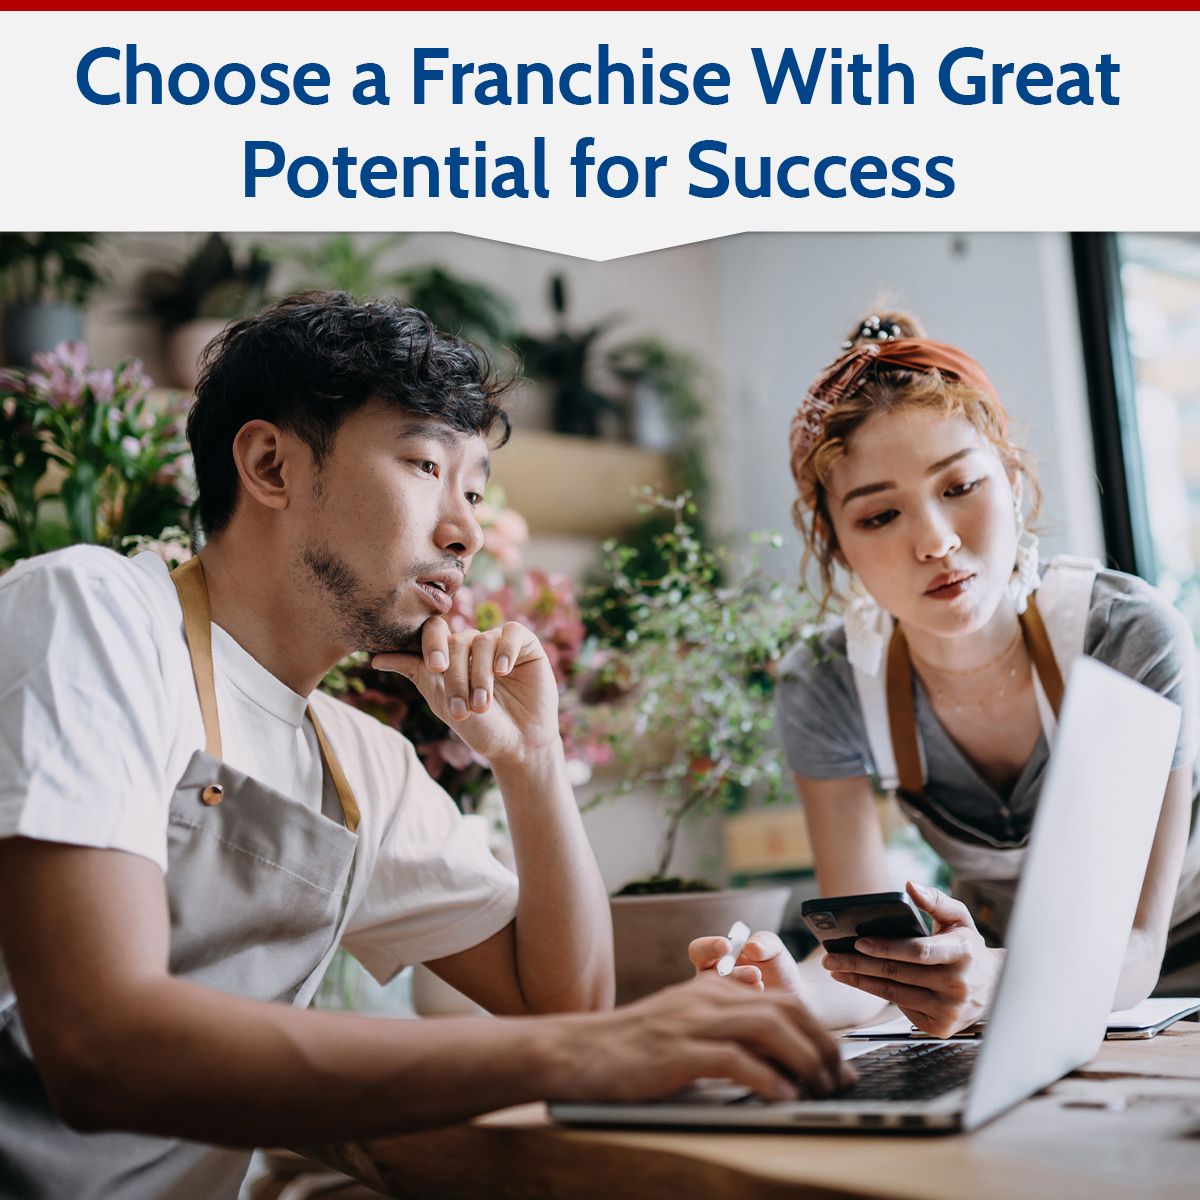 Choose a Franchise With Great Potential for Success